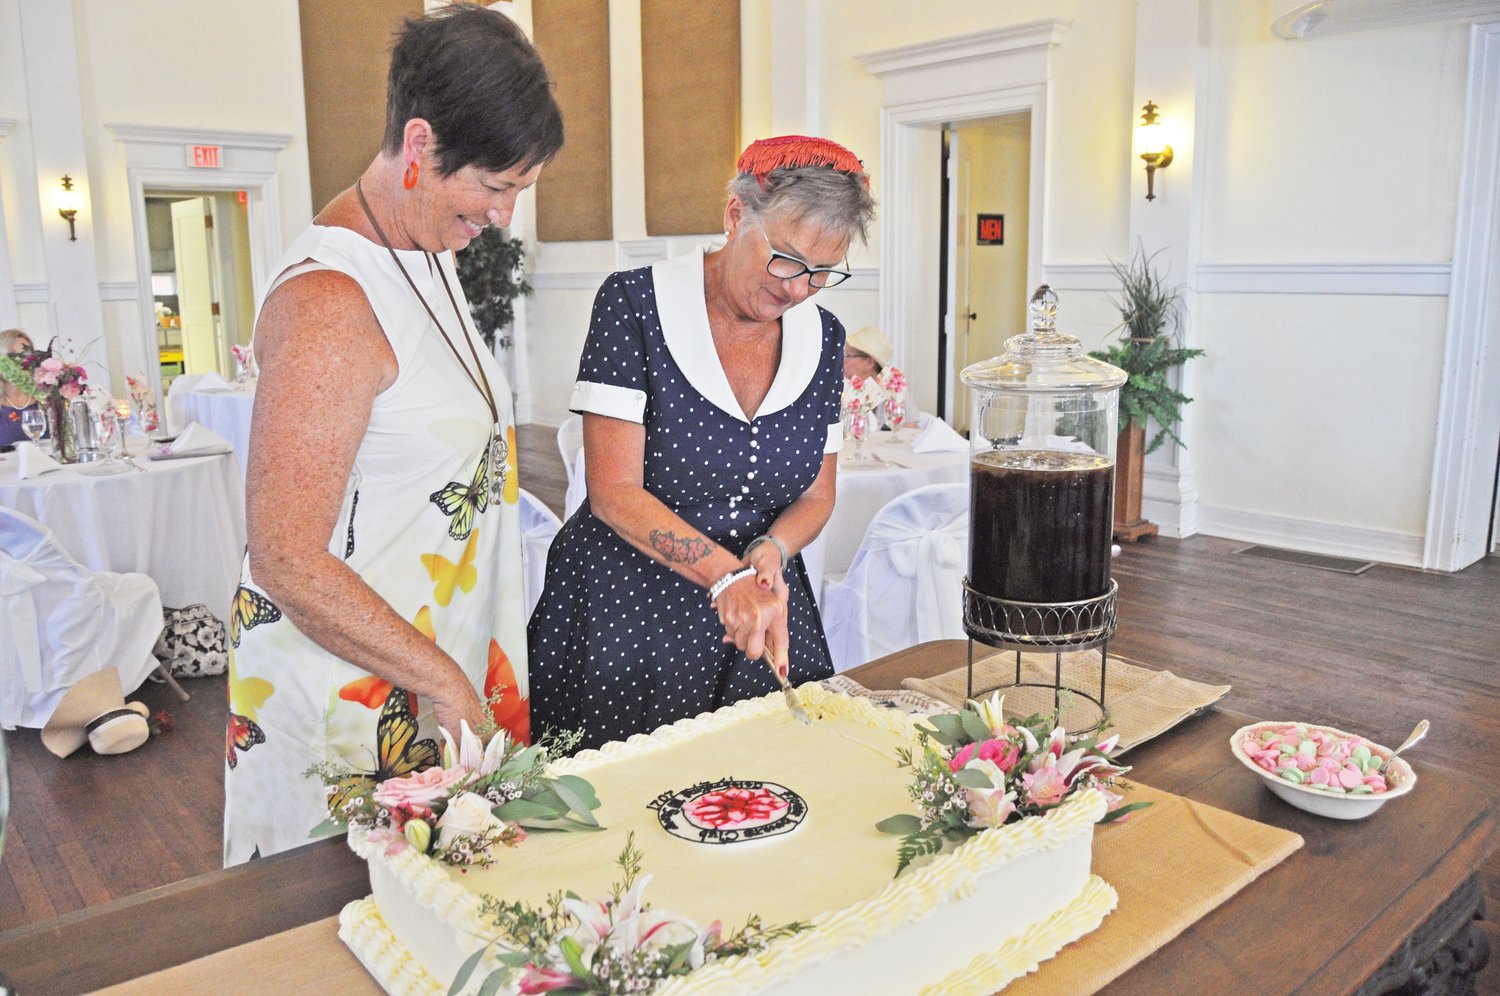 Terri Trinkle cuts the cake as Paula Furr watches during a 100th anniversary celebration for the Flower Lovers Garden Club at the Masonic Cornerstone Grand Hall and Event Center on Wednesday.